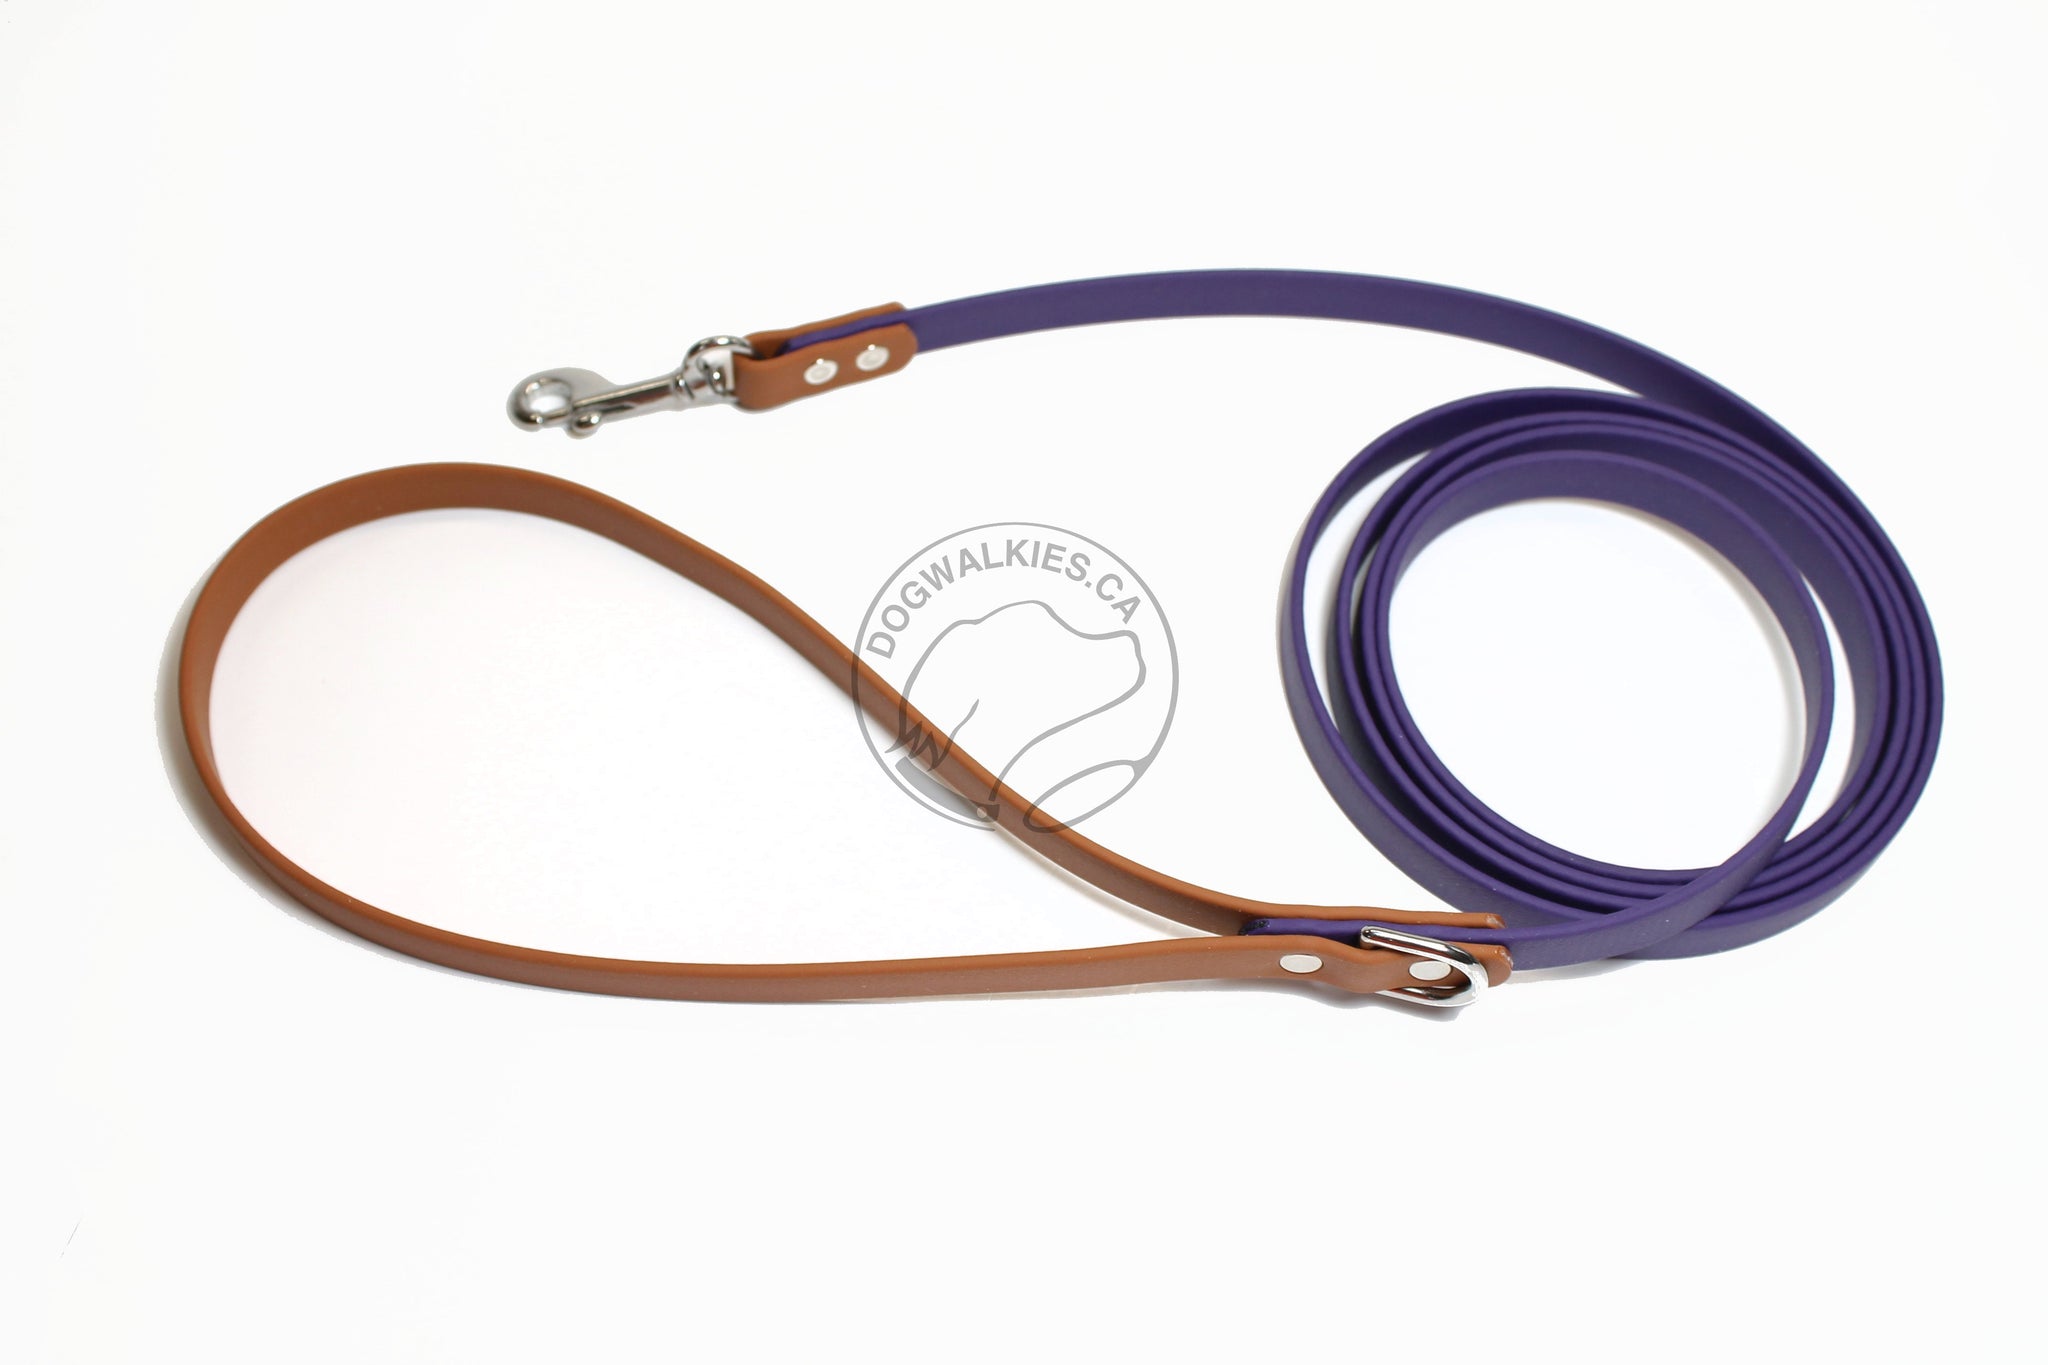 Buy Online Dog Leash Made From Beta Biothane Two Horse Tack